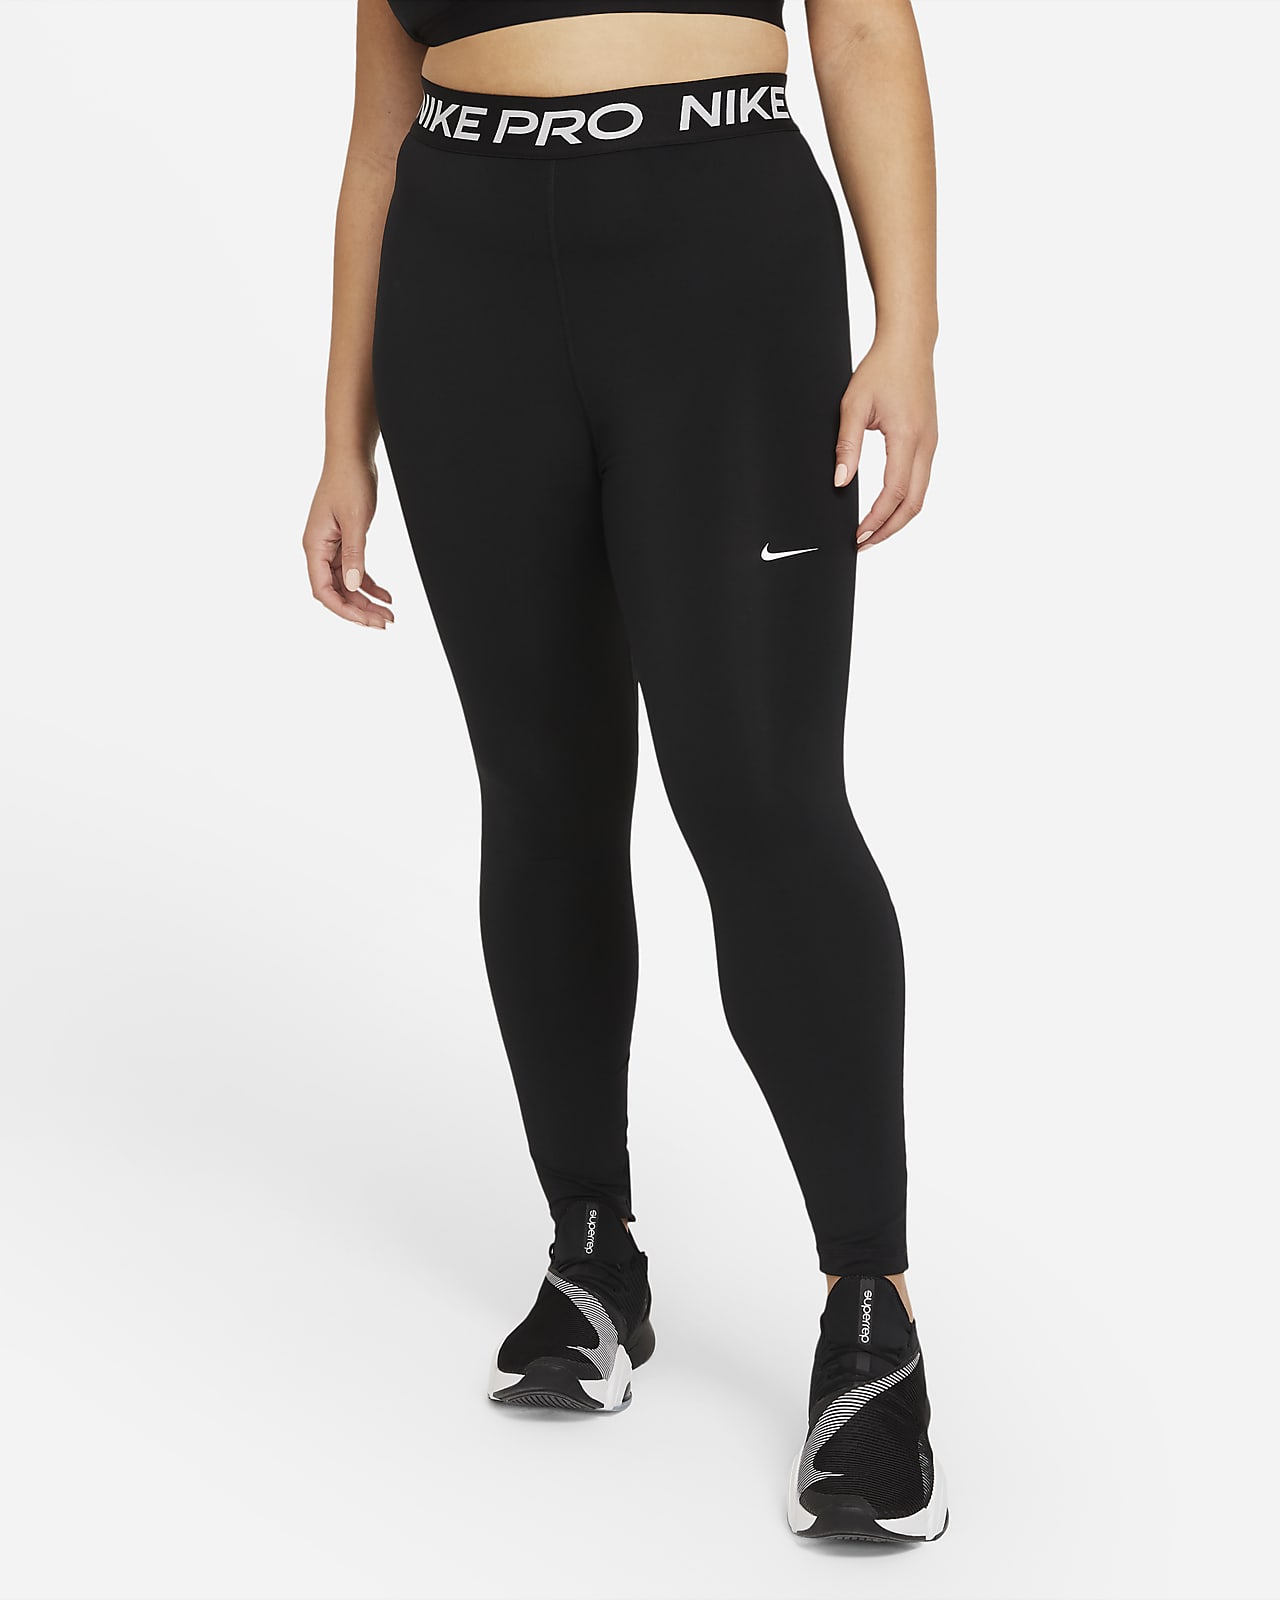 Nike Power Speed Tights Green – AAS ATHLETICS